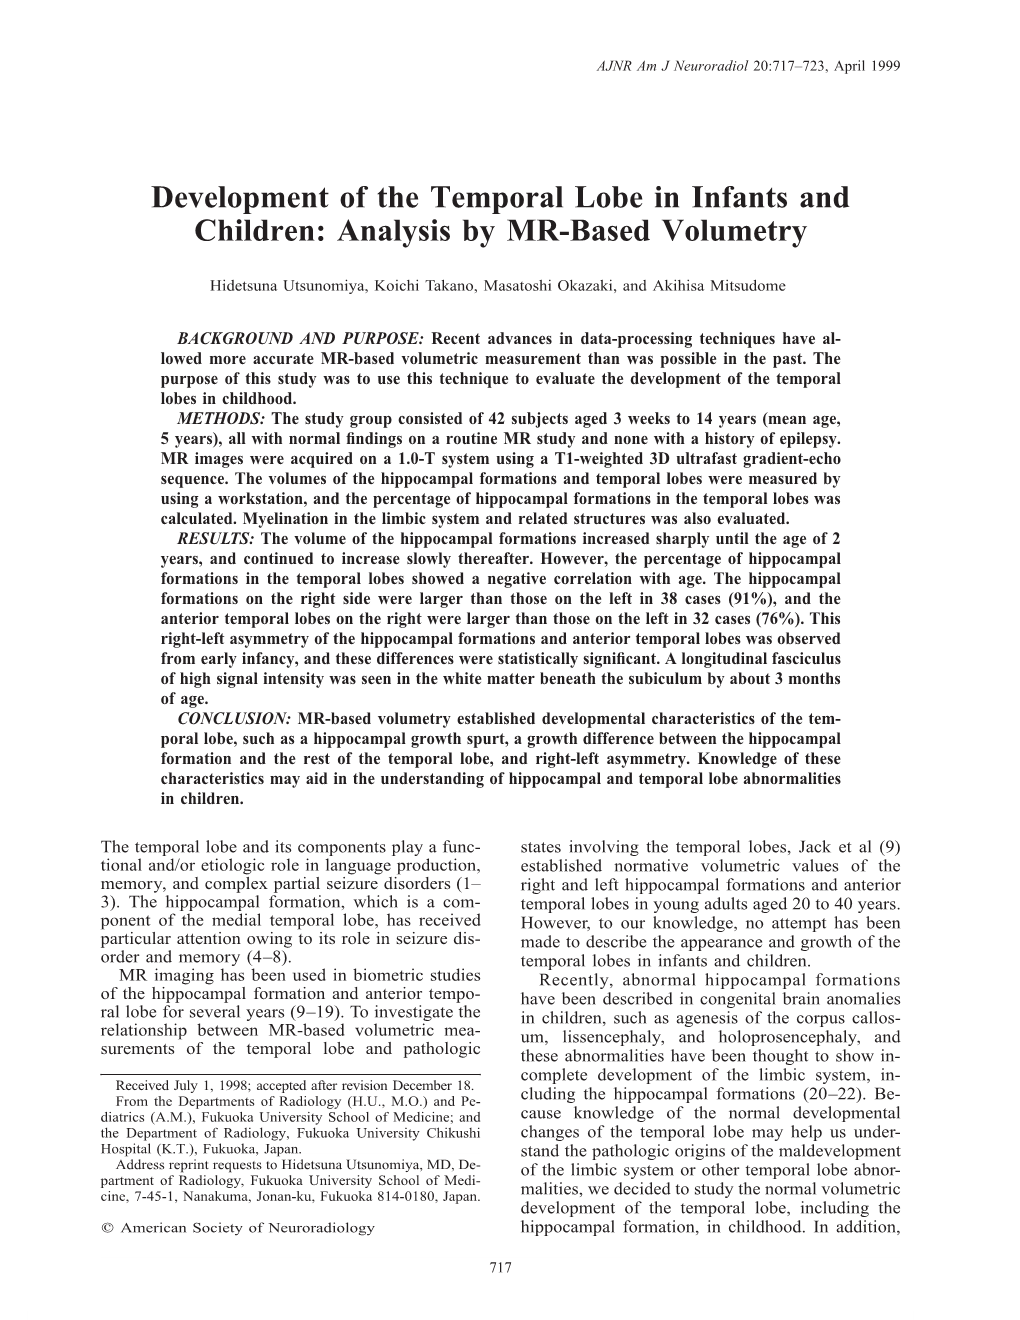 Development of the Temporal Lobe in Infants and Children: Analysis by MR-Based Volumetry